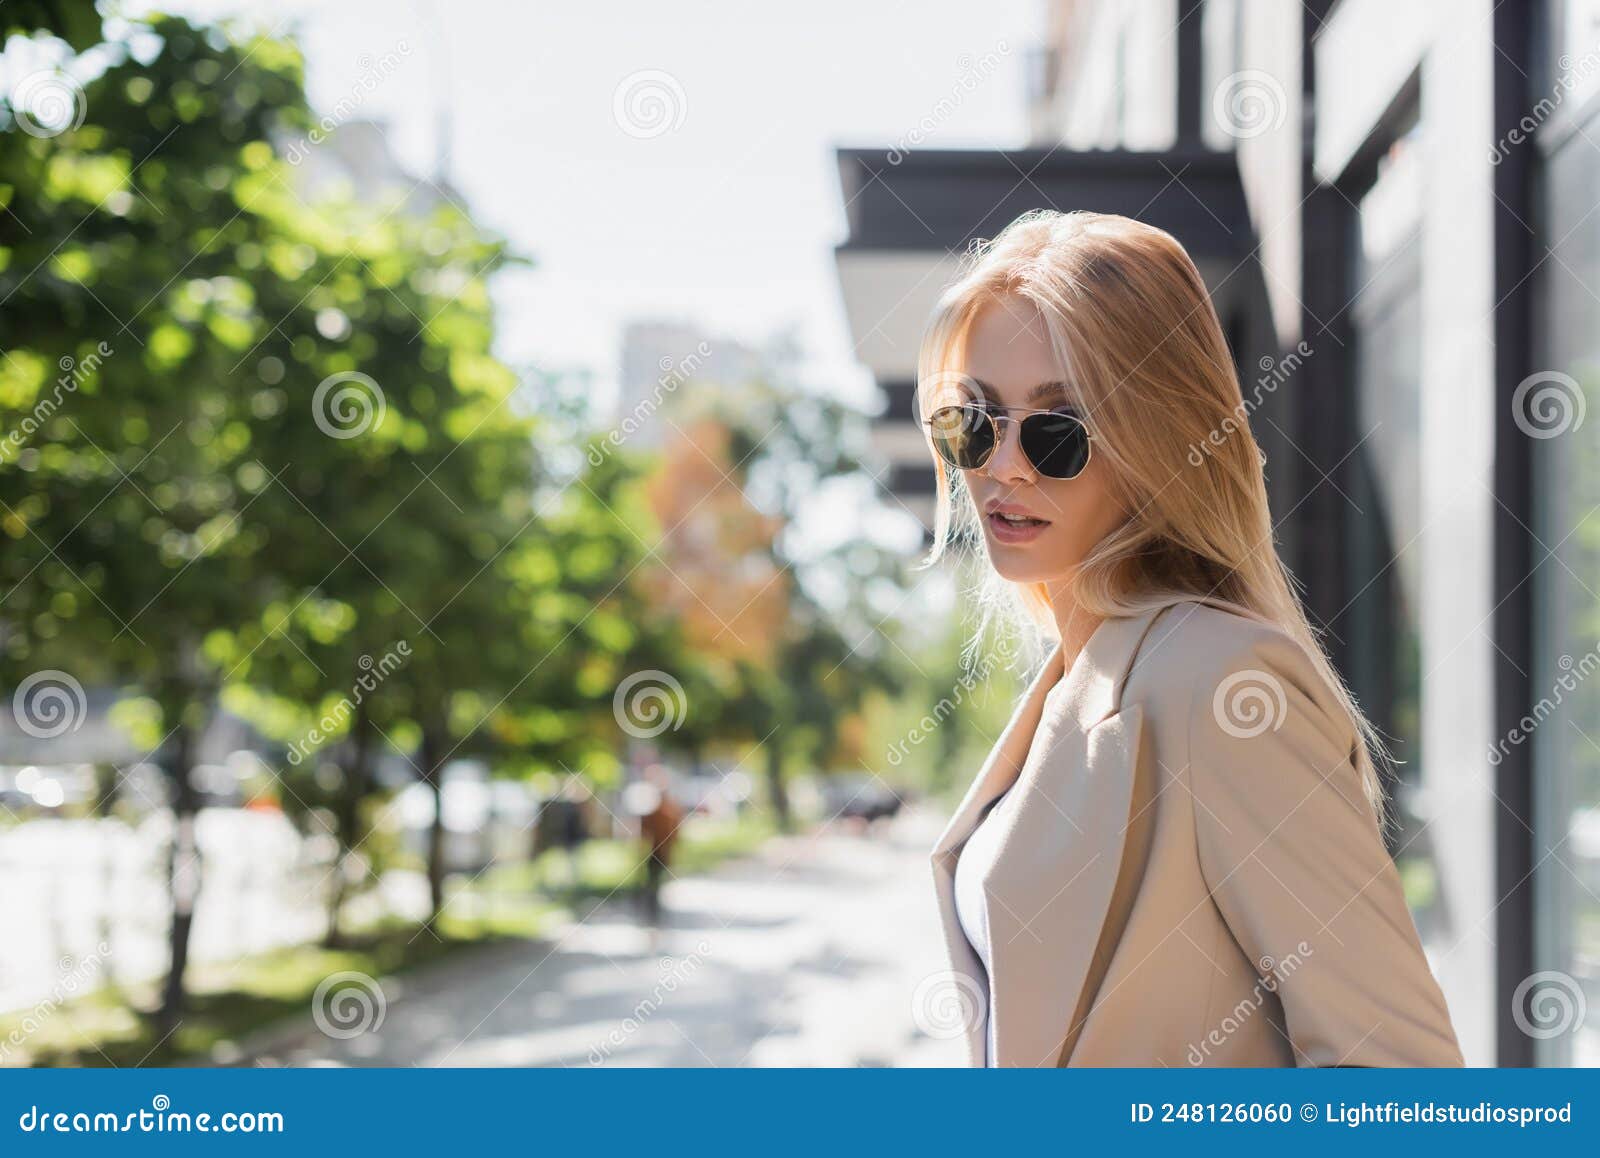 8. Blonde hair and brown sunglasses fashion - wide 4